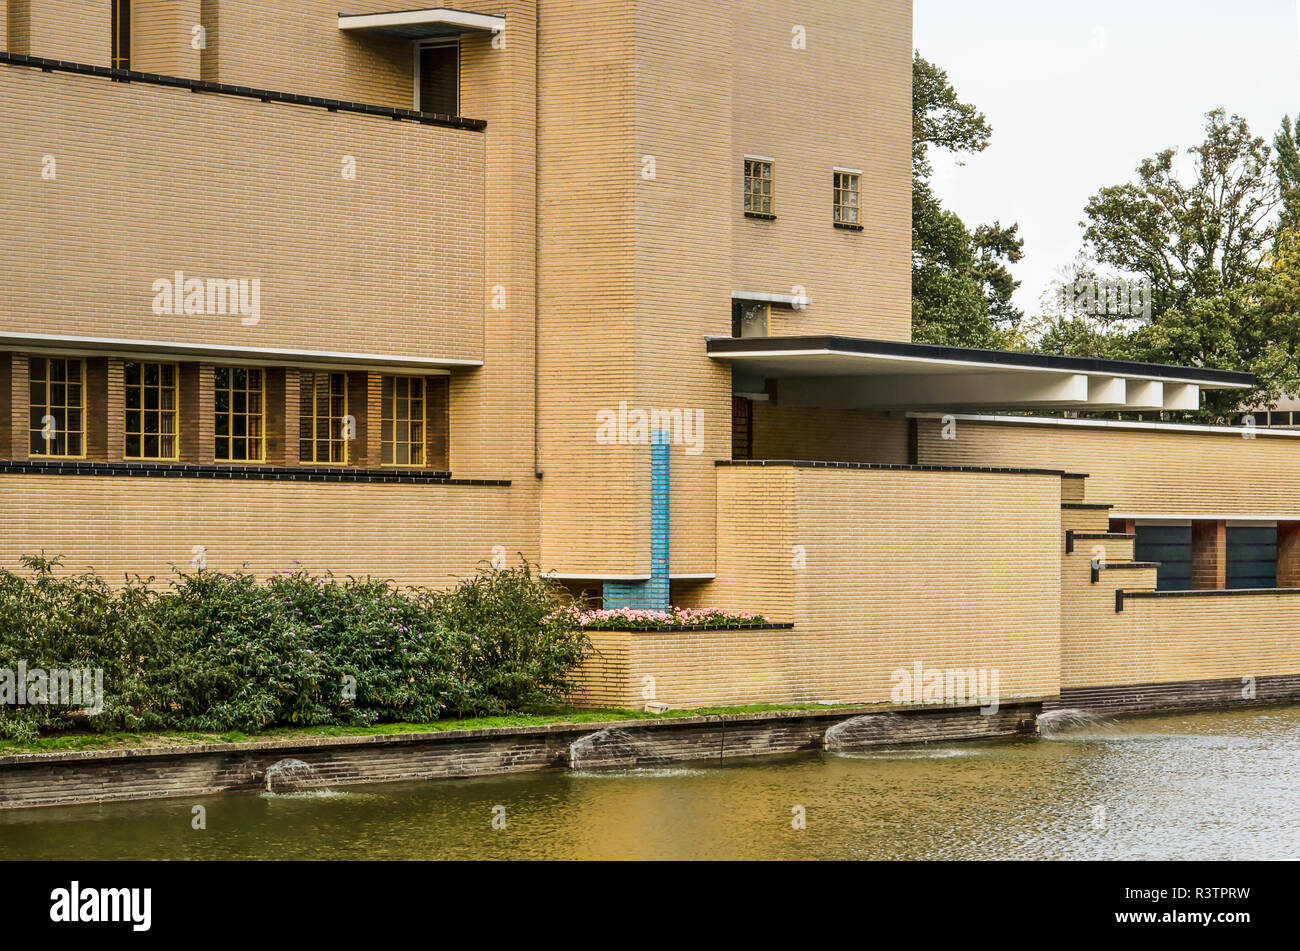 Hilversum, The Netherlands, September 20, 2018: detail of the south facade of the city hall by architect W.M. Dudok (1931) with the building's main en Stock Photo